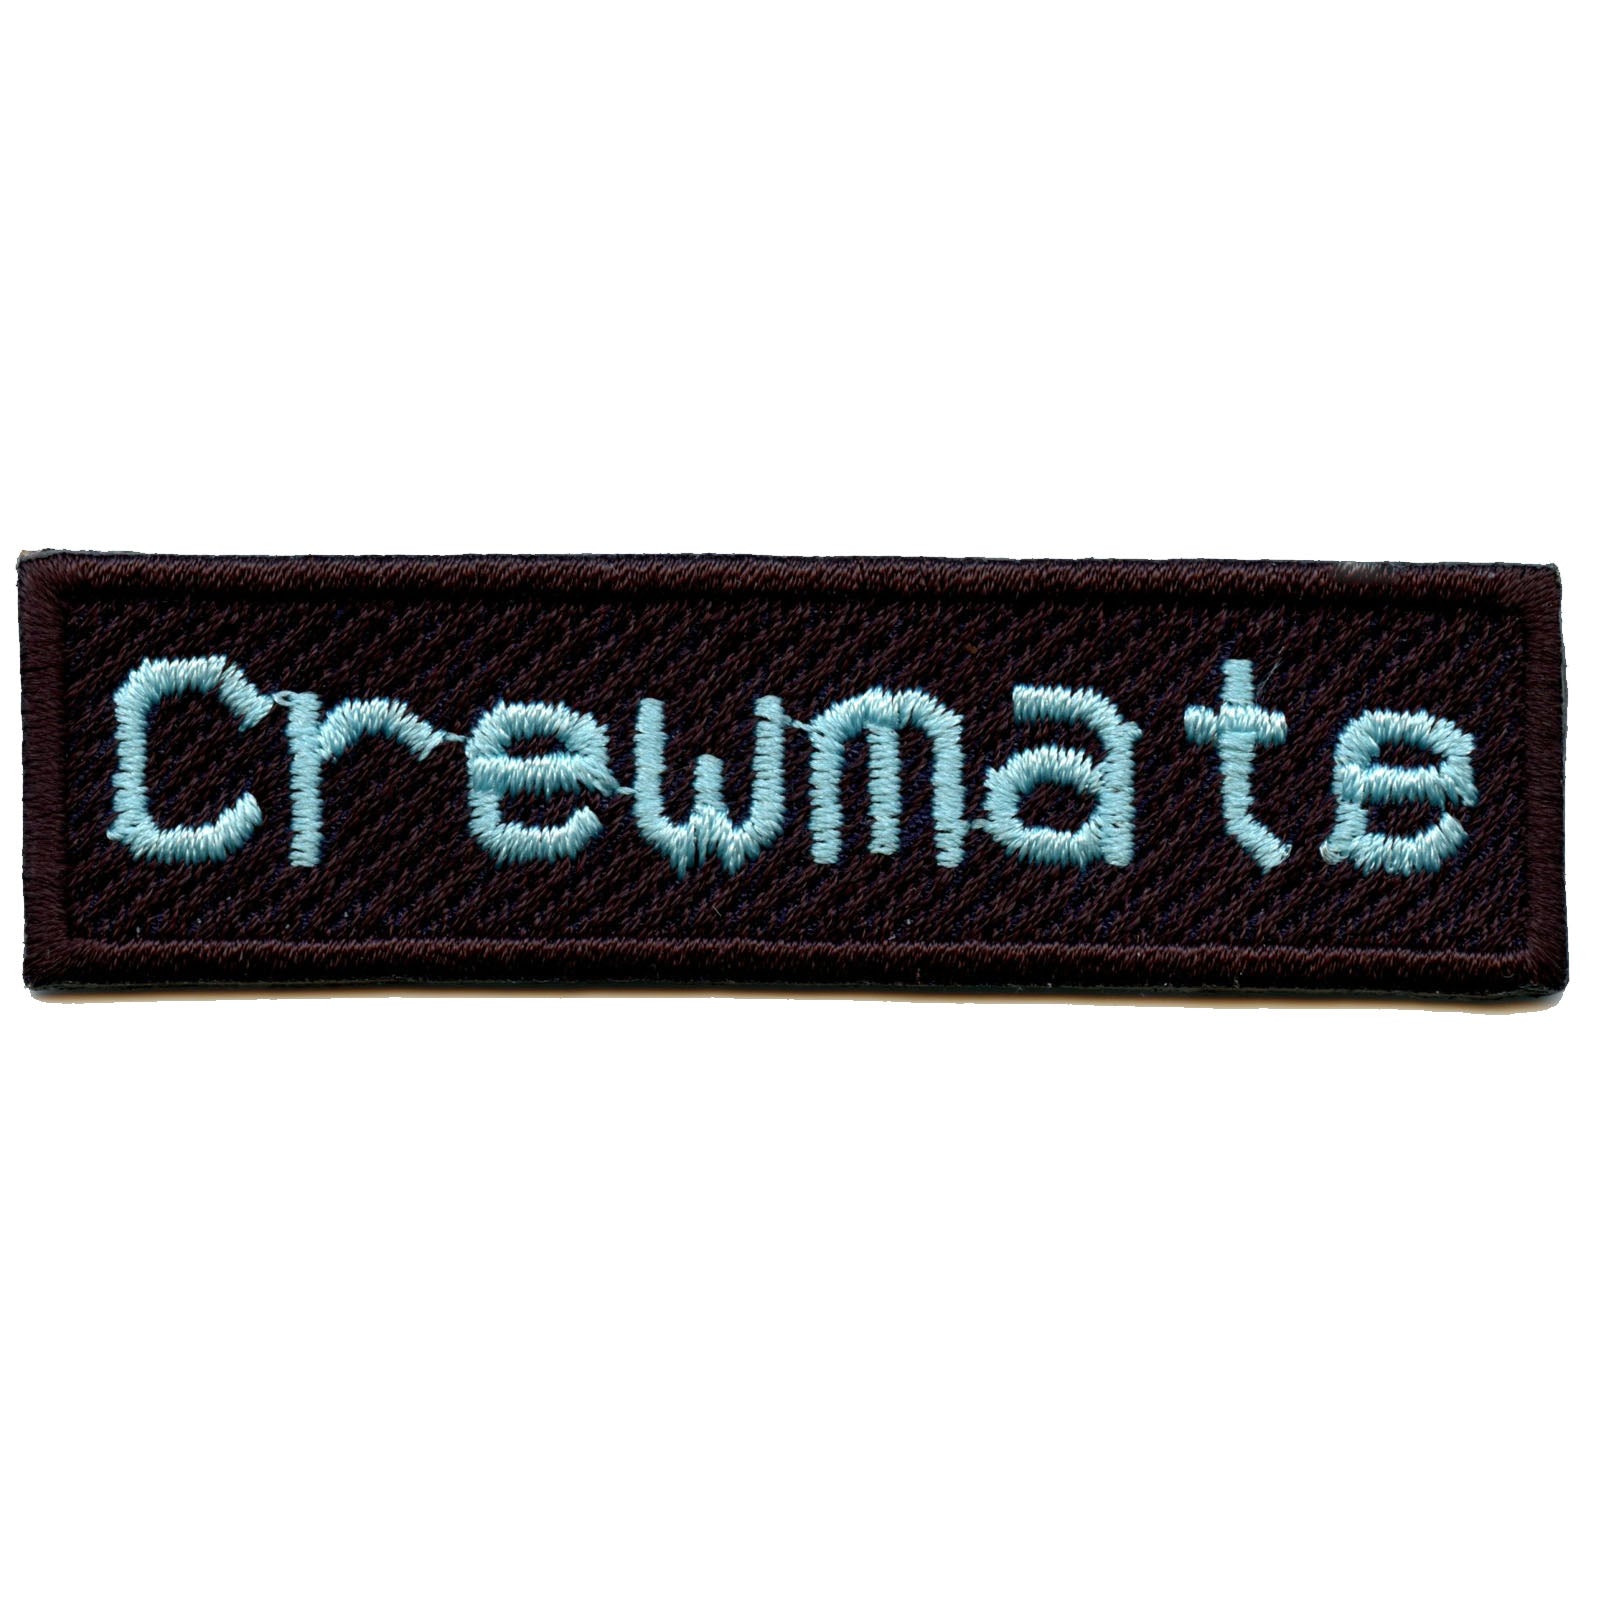 Crewmate Box Logo Embroidered Iron On Patch 